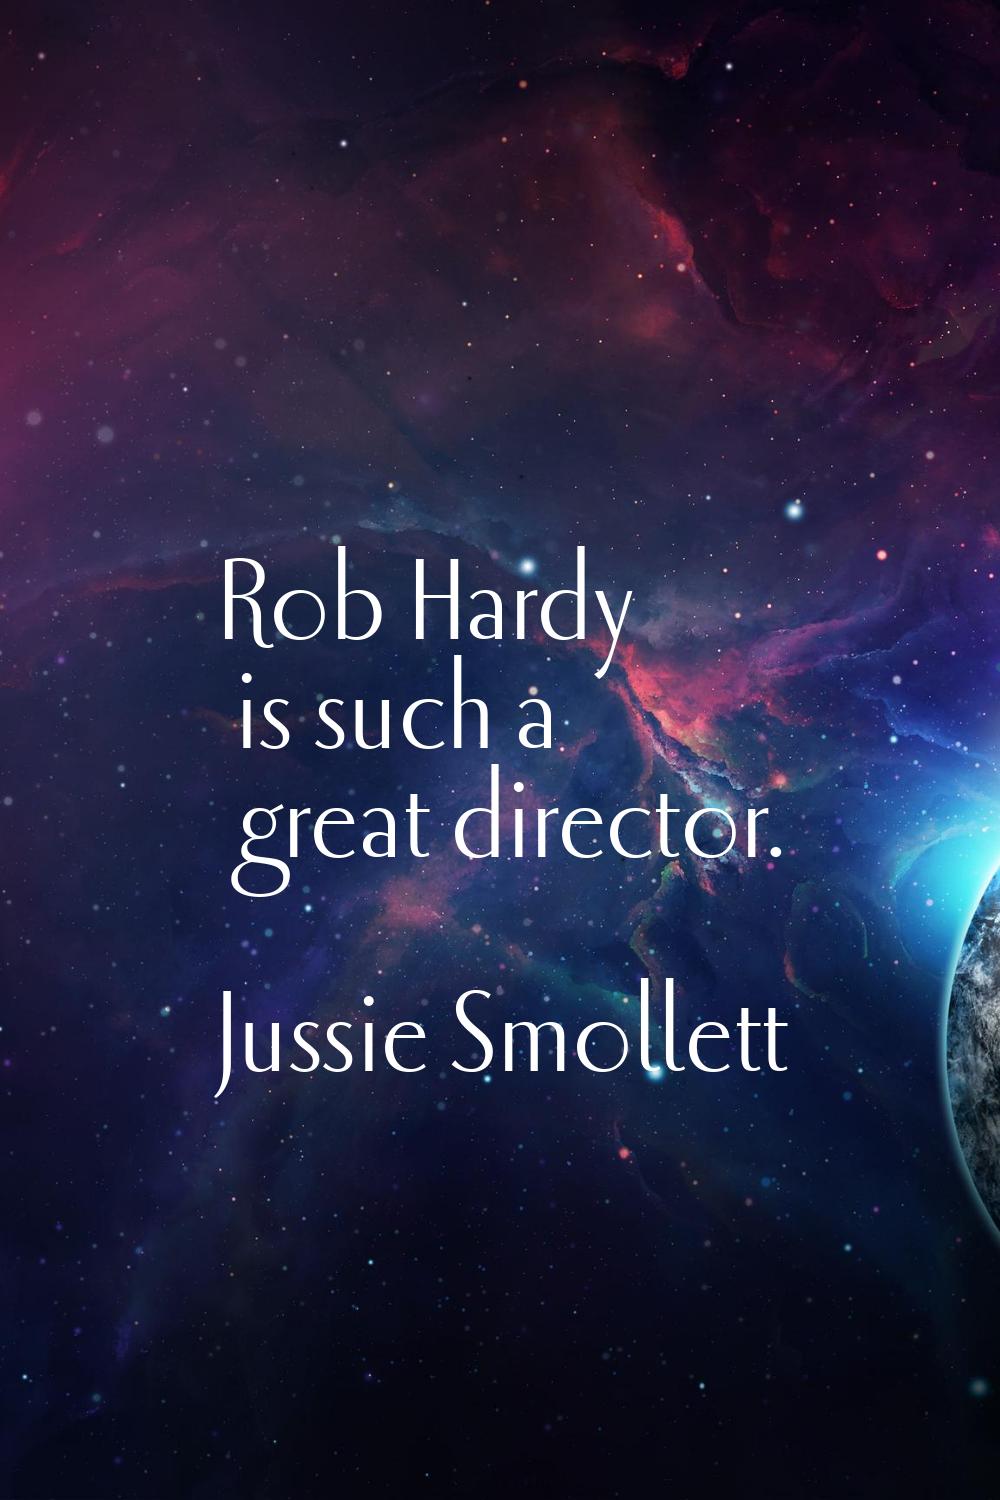 Rob Hardy is such a great director.